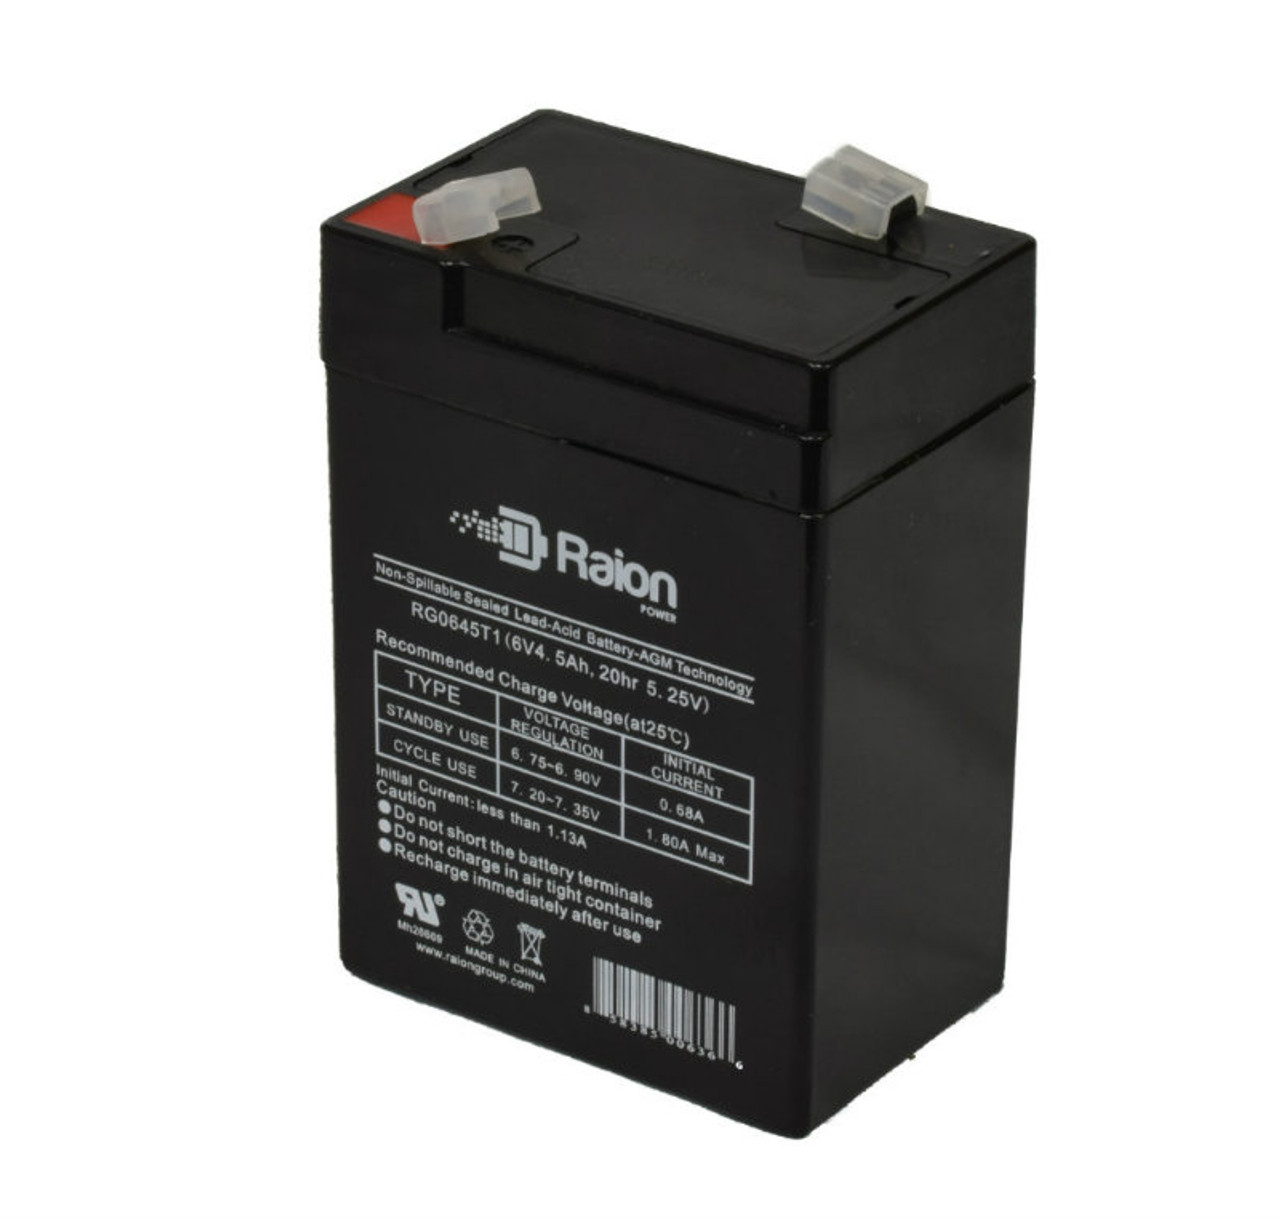 Raion Power RG0645T1 6V 4.5Ah Replacement Battery Cartridge for Gruber Power 58AGEN-6-4-F1